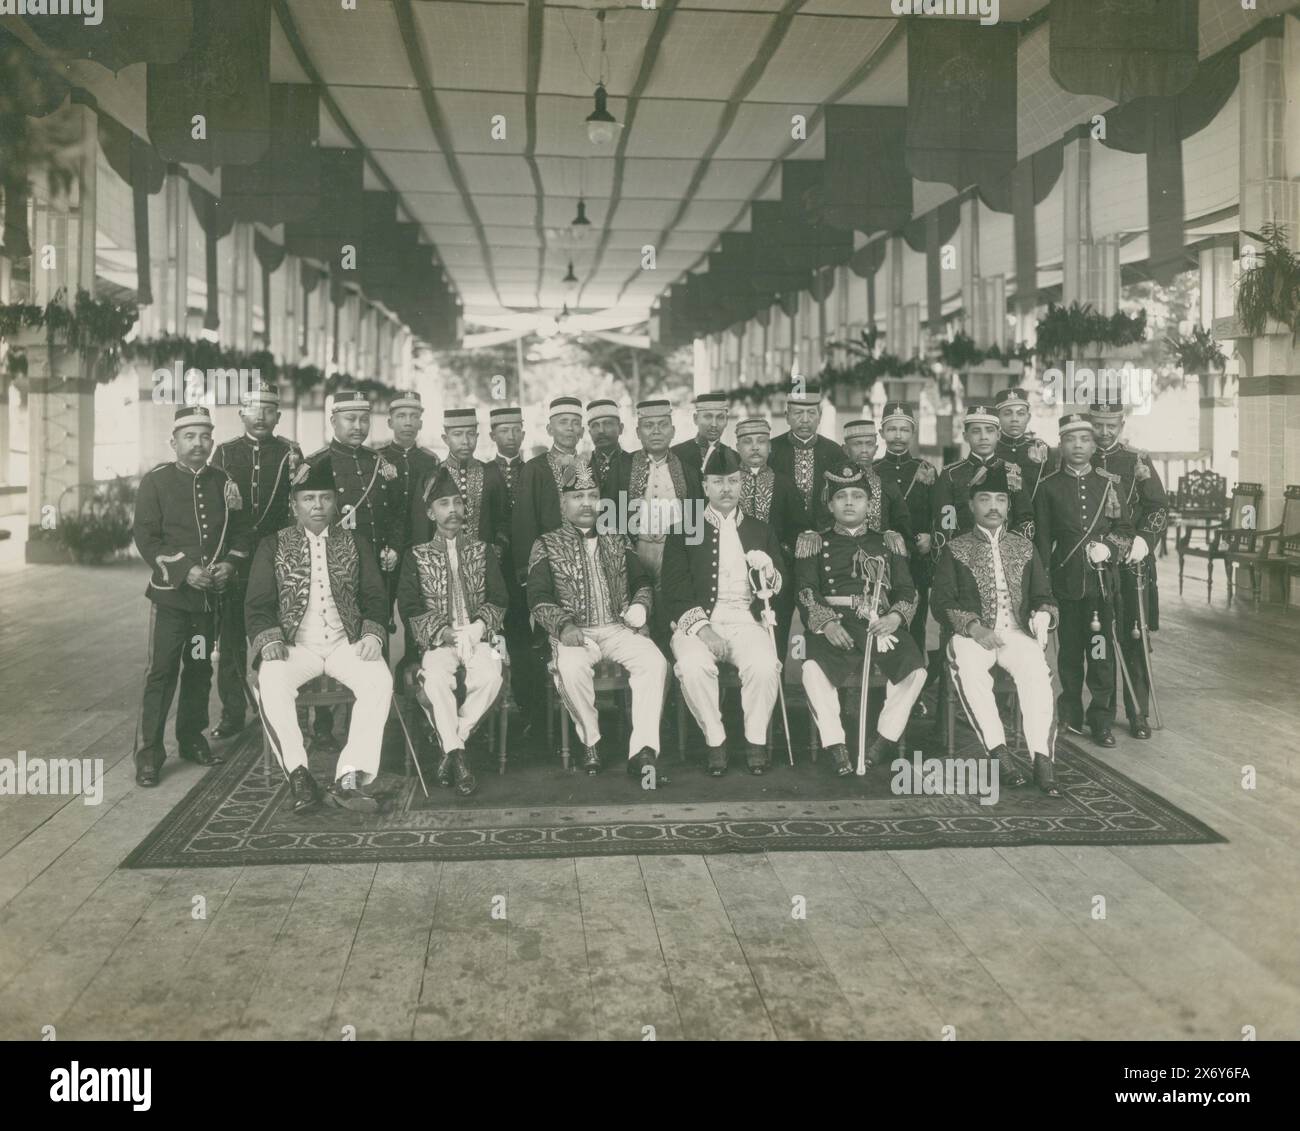 Group portrait of high-ranking officials at the court of Langkat, First row: Toengkoe Zainal Abidin of Pangkalan Brandan, Toenkoe Adil of Bindjei, Sultan of Langkat, Assistant Resident Roos van Raadshoven, Mahmoed, son of sultan and Djaksa (procurator general) of Tanjongpoera, second row : Dato of Besitan and unknown Dato's. This photo is part of an album., photograph, anonymous, 1919, photographic support, gelatin silver print, height, 220 mm × width, 270 mm Stock Photo